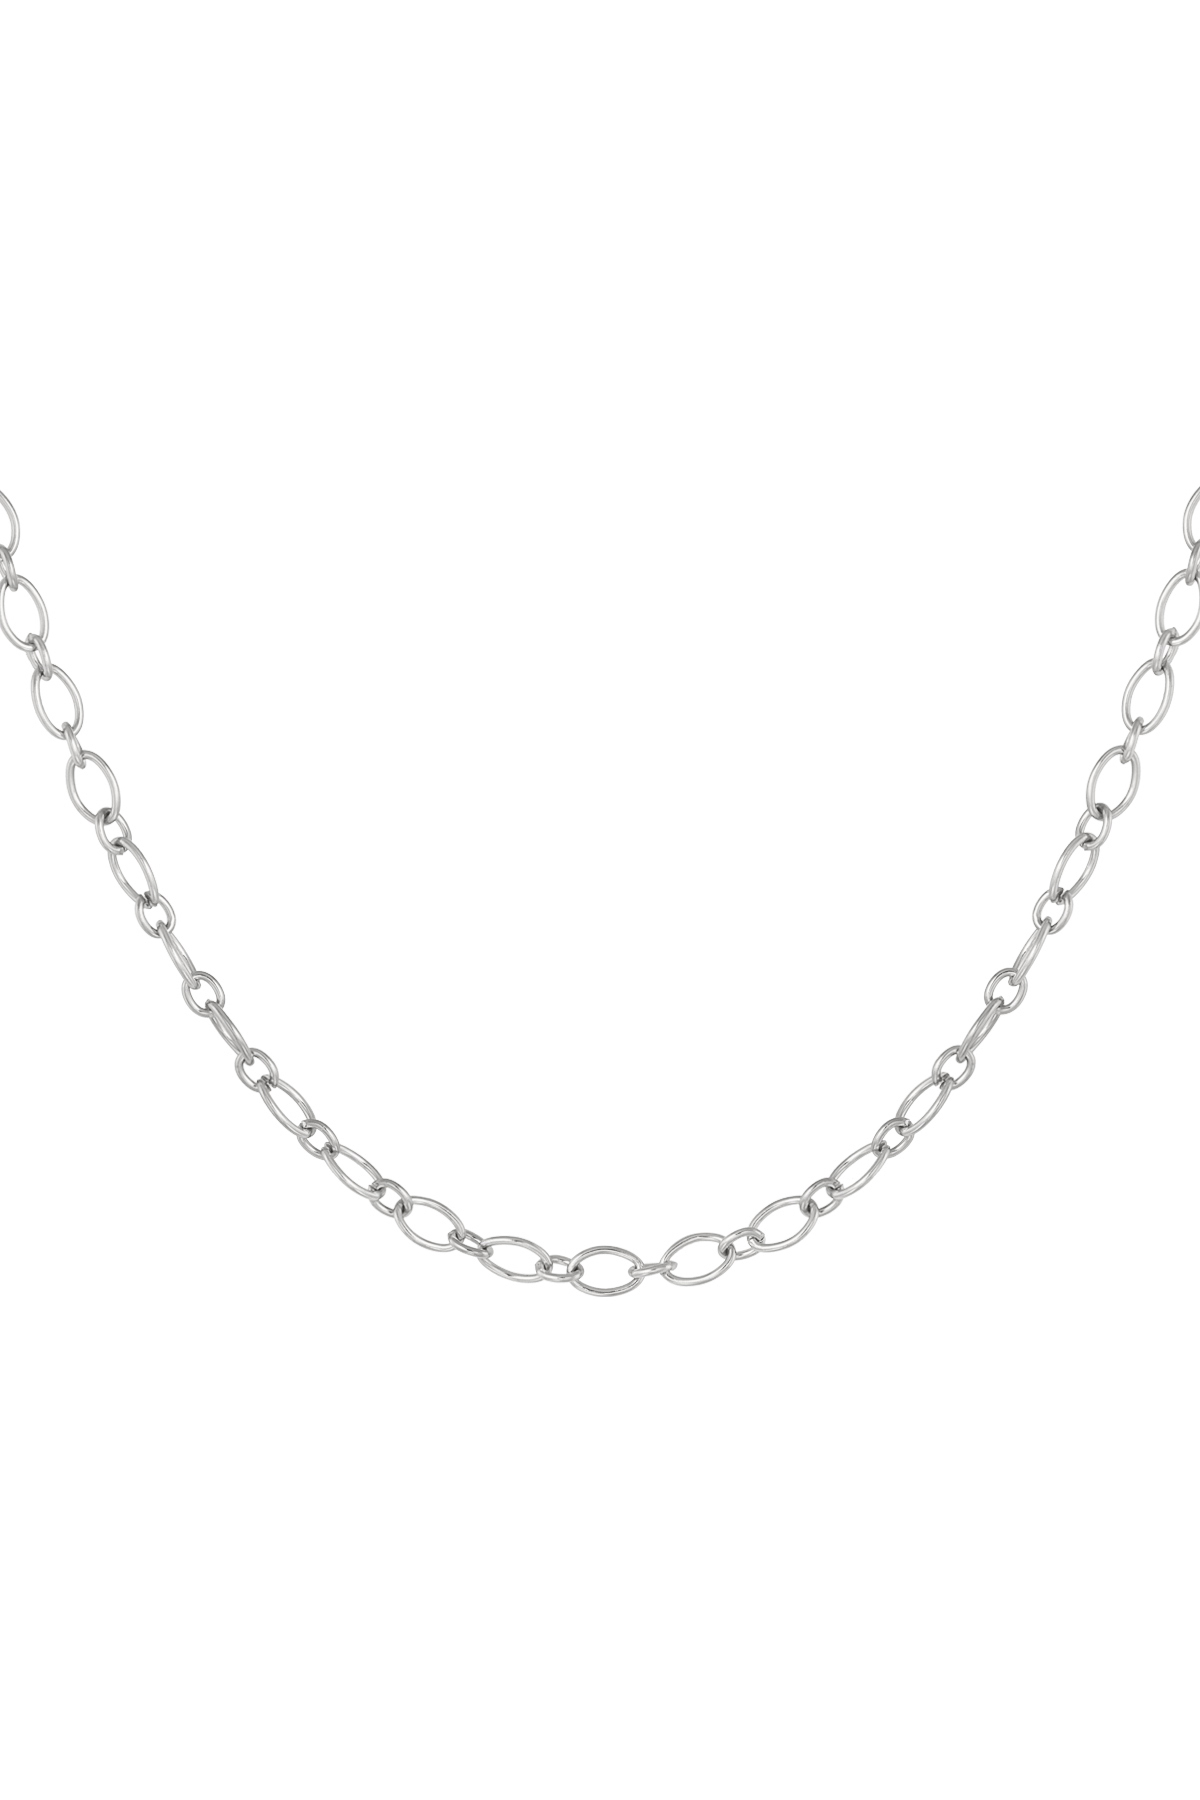 Link chain basic - silver h5 